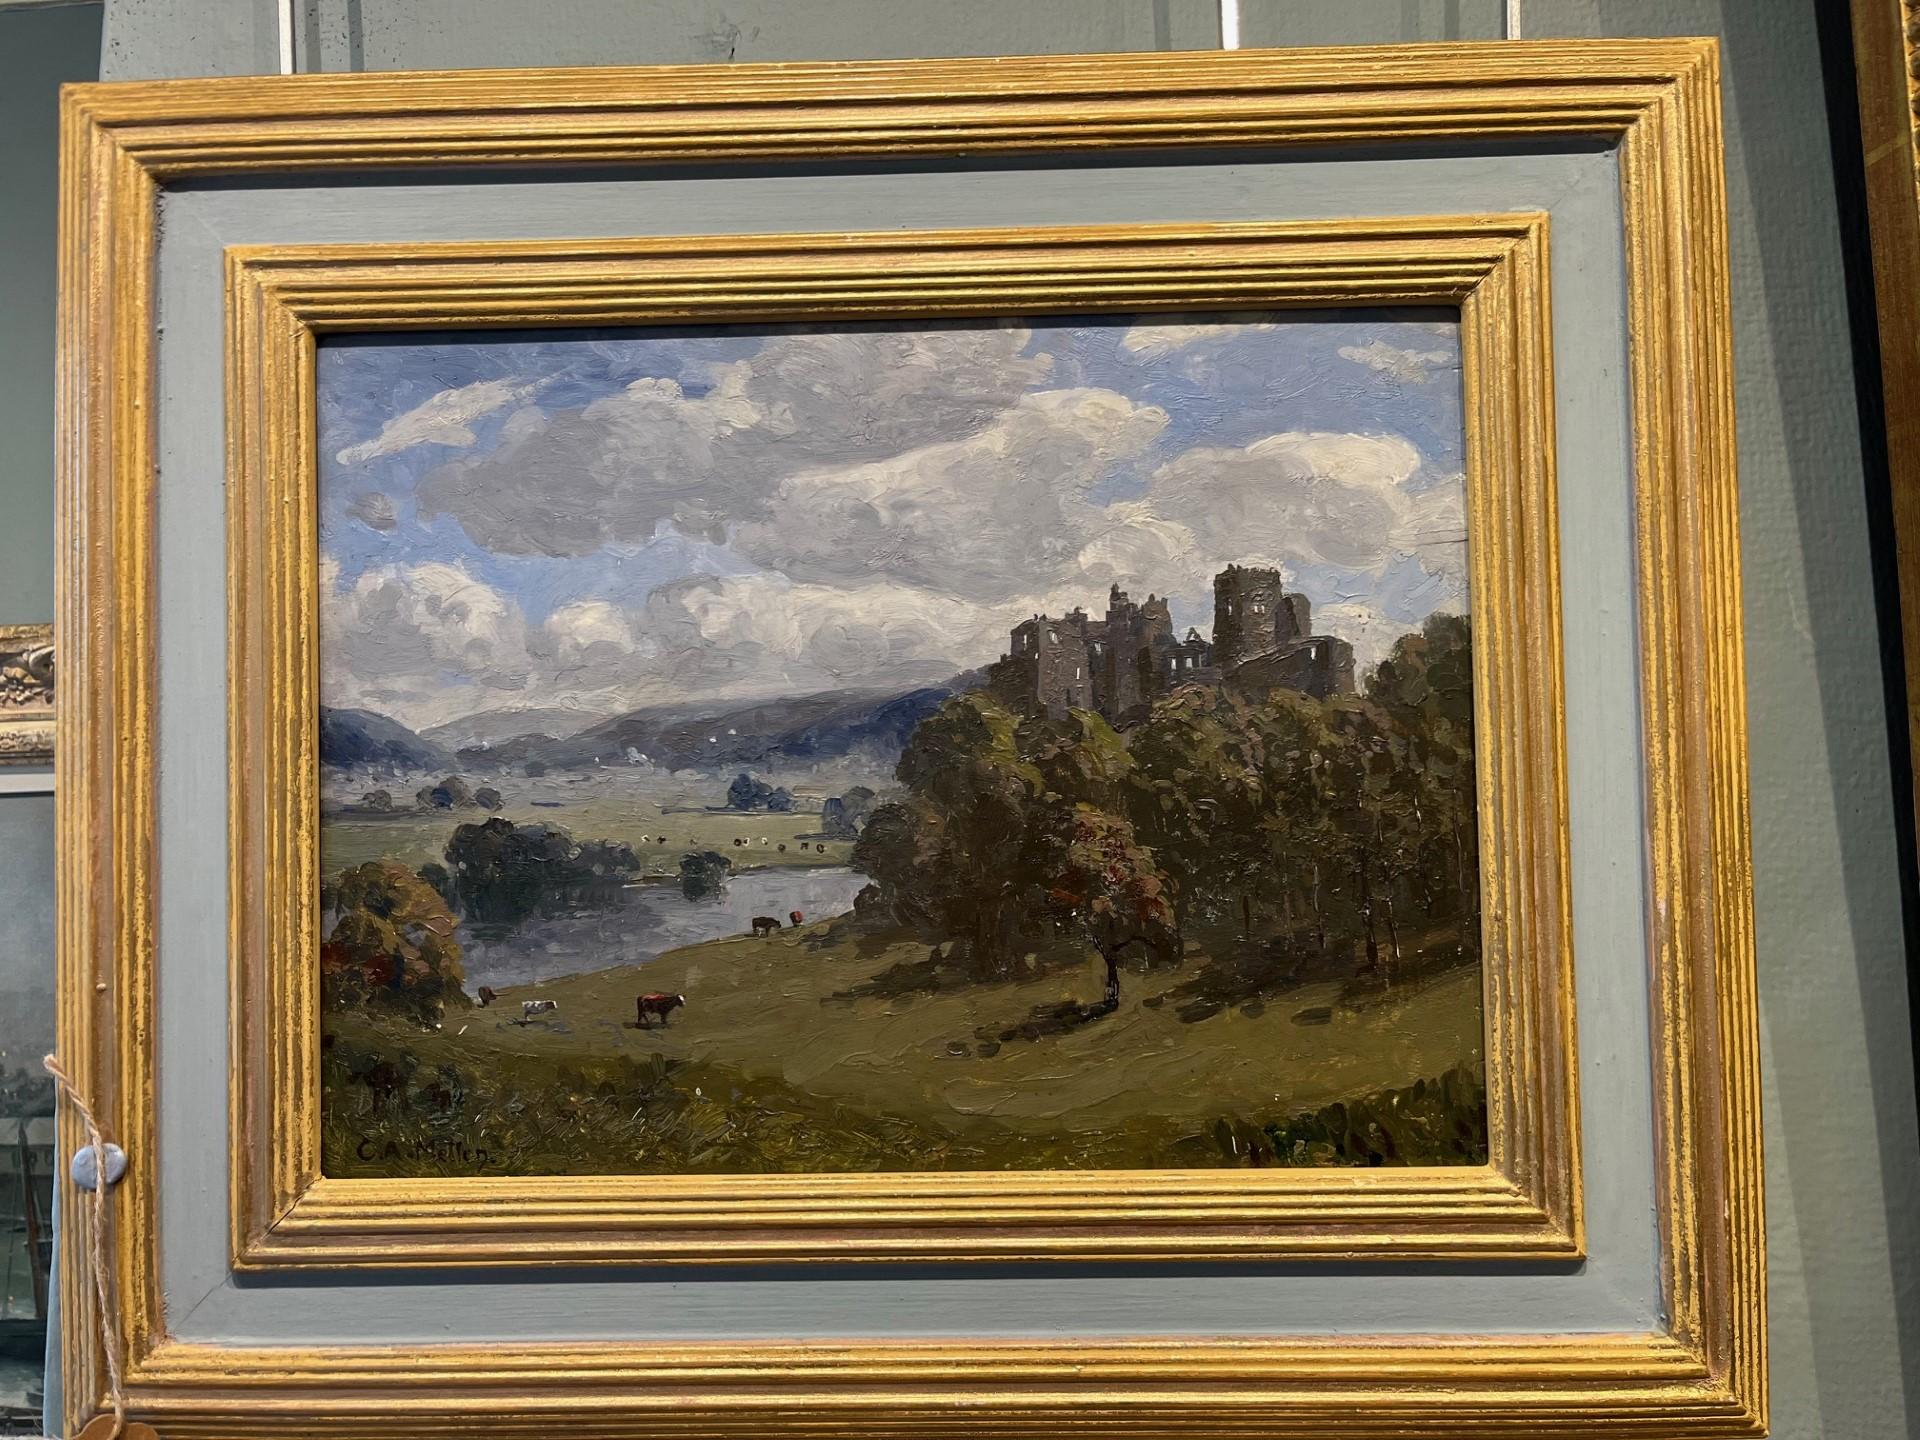 Goodrich Castle on the River Wye, Herefordshire
Oil painting on panel, with oil sketch of Symonds Yat verso.  Housed in handmade gold and coloured Whistler style frame.

Beautiful mid 20th century landscape of the River Wye with the ruins of